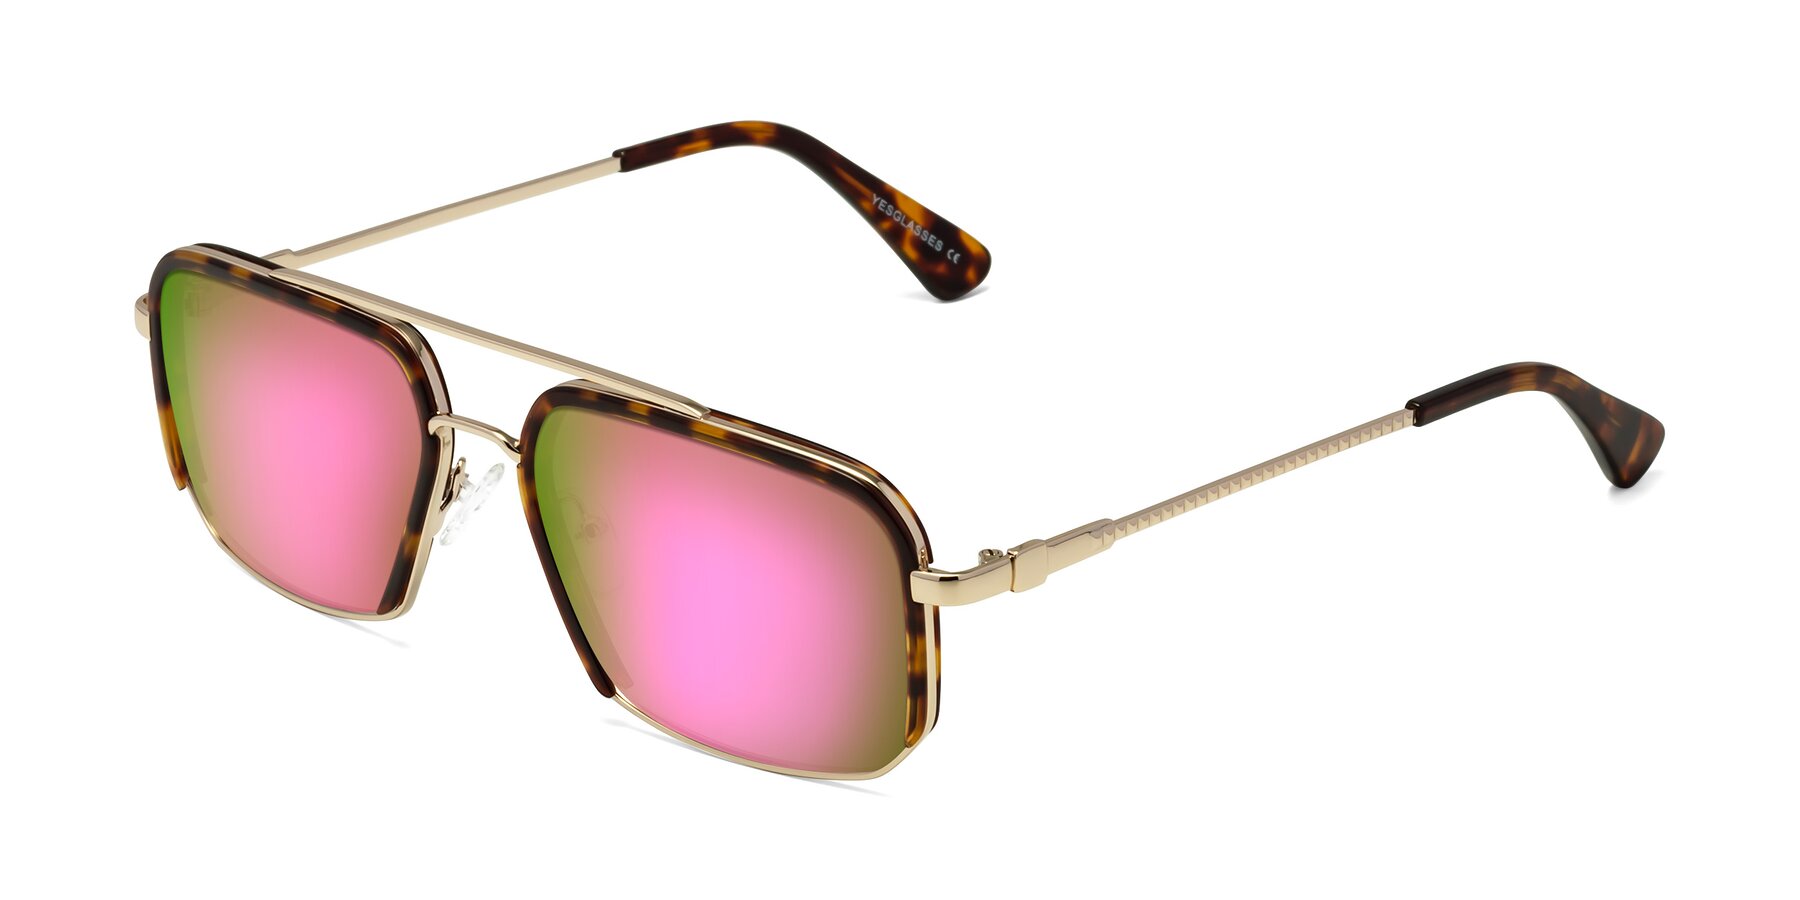 Angle of Dechter in Tortoise-Gold with Pink Mirrored Lenses